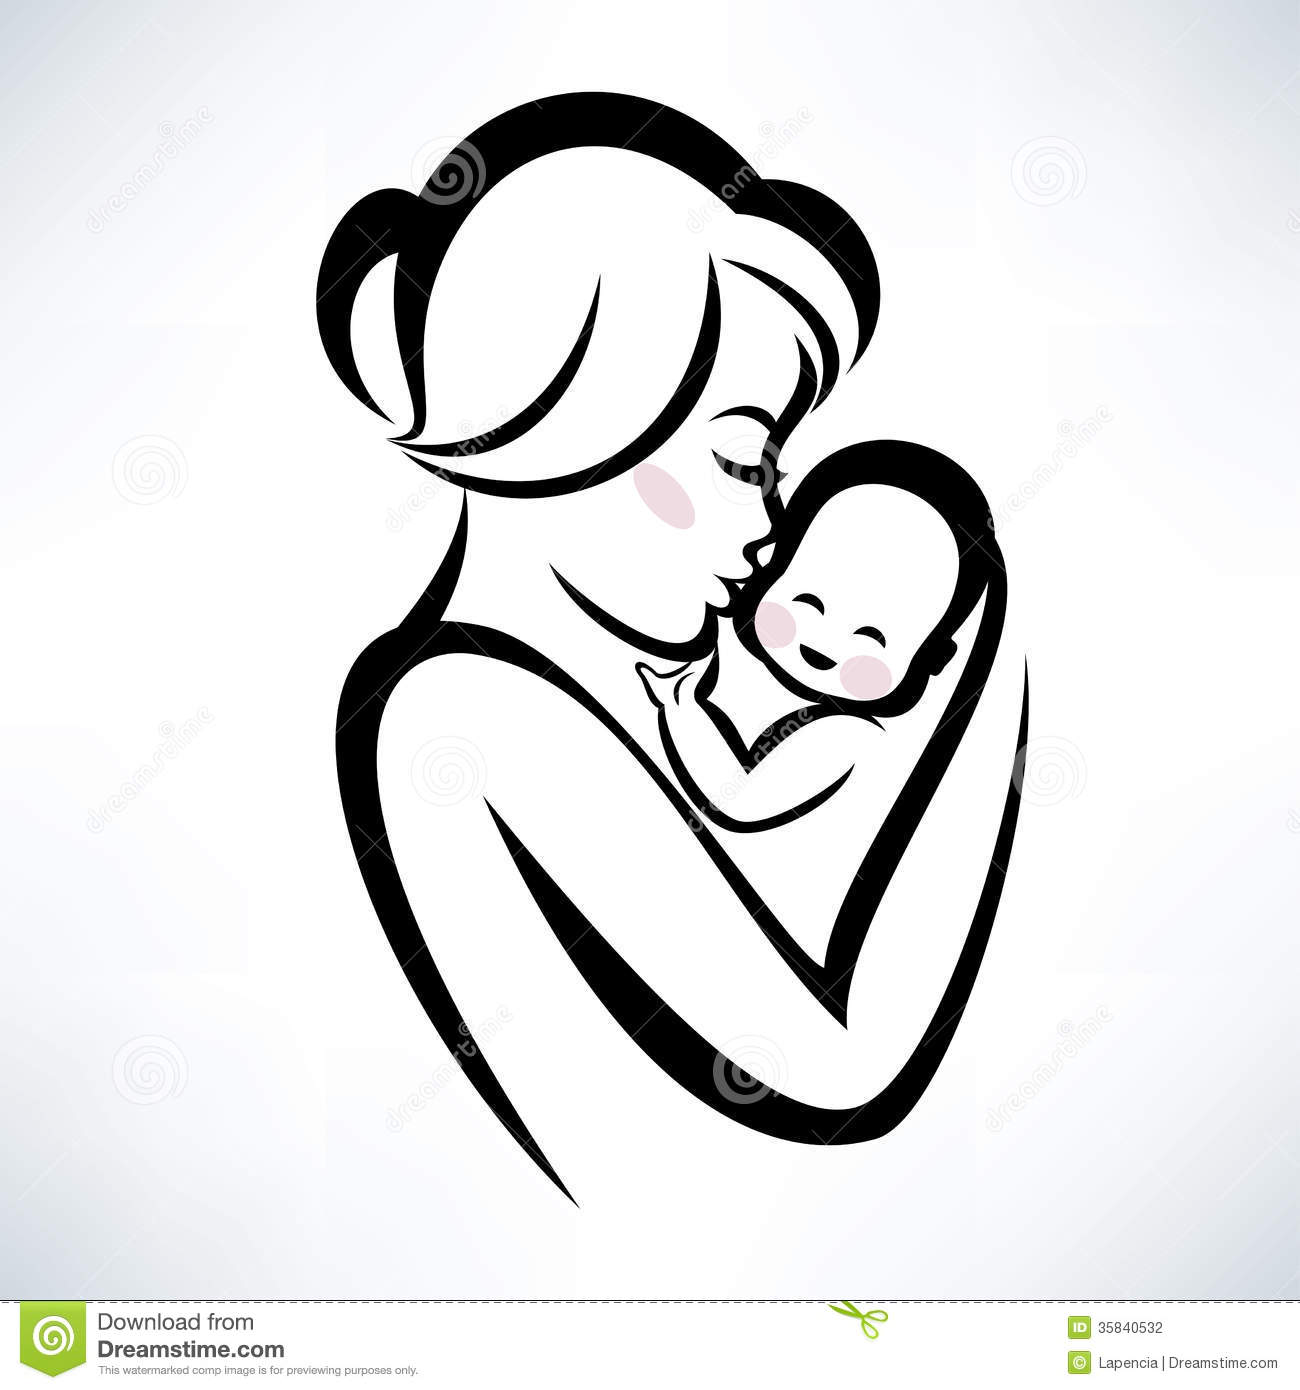 Displaying 15  Images For   Mother Daughter Love Symbol